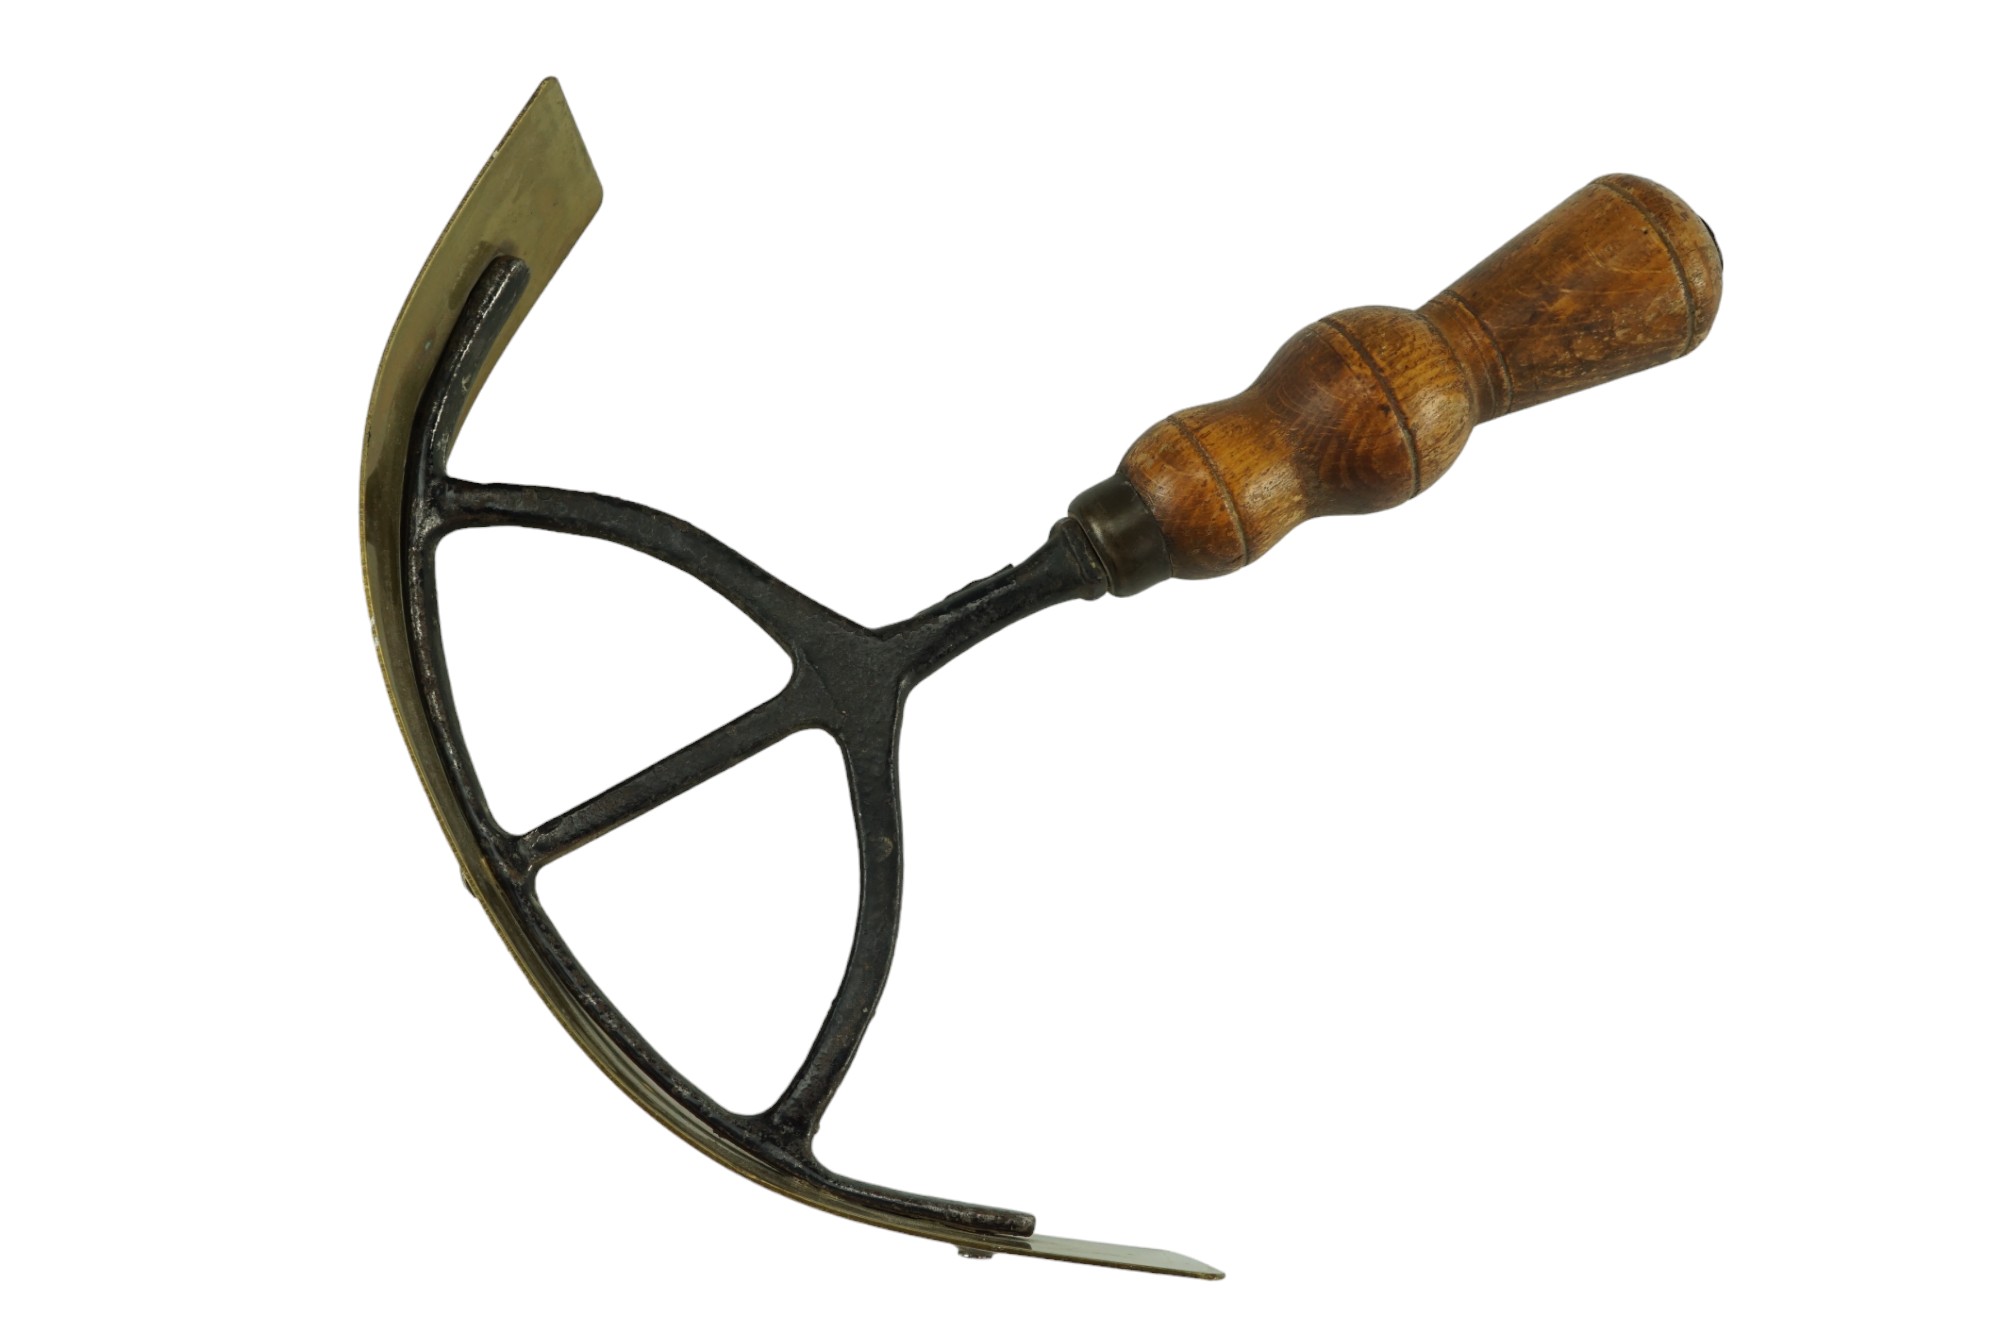 A late 19th / early 20th Century horse sweat scraper, cast iron and brass with a turned oak